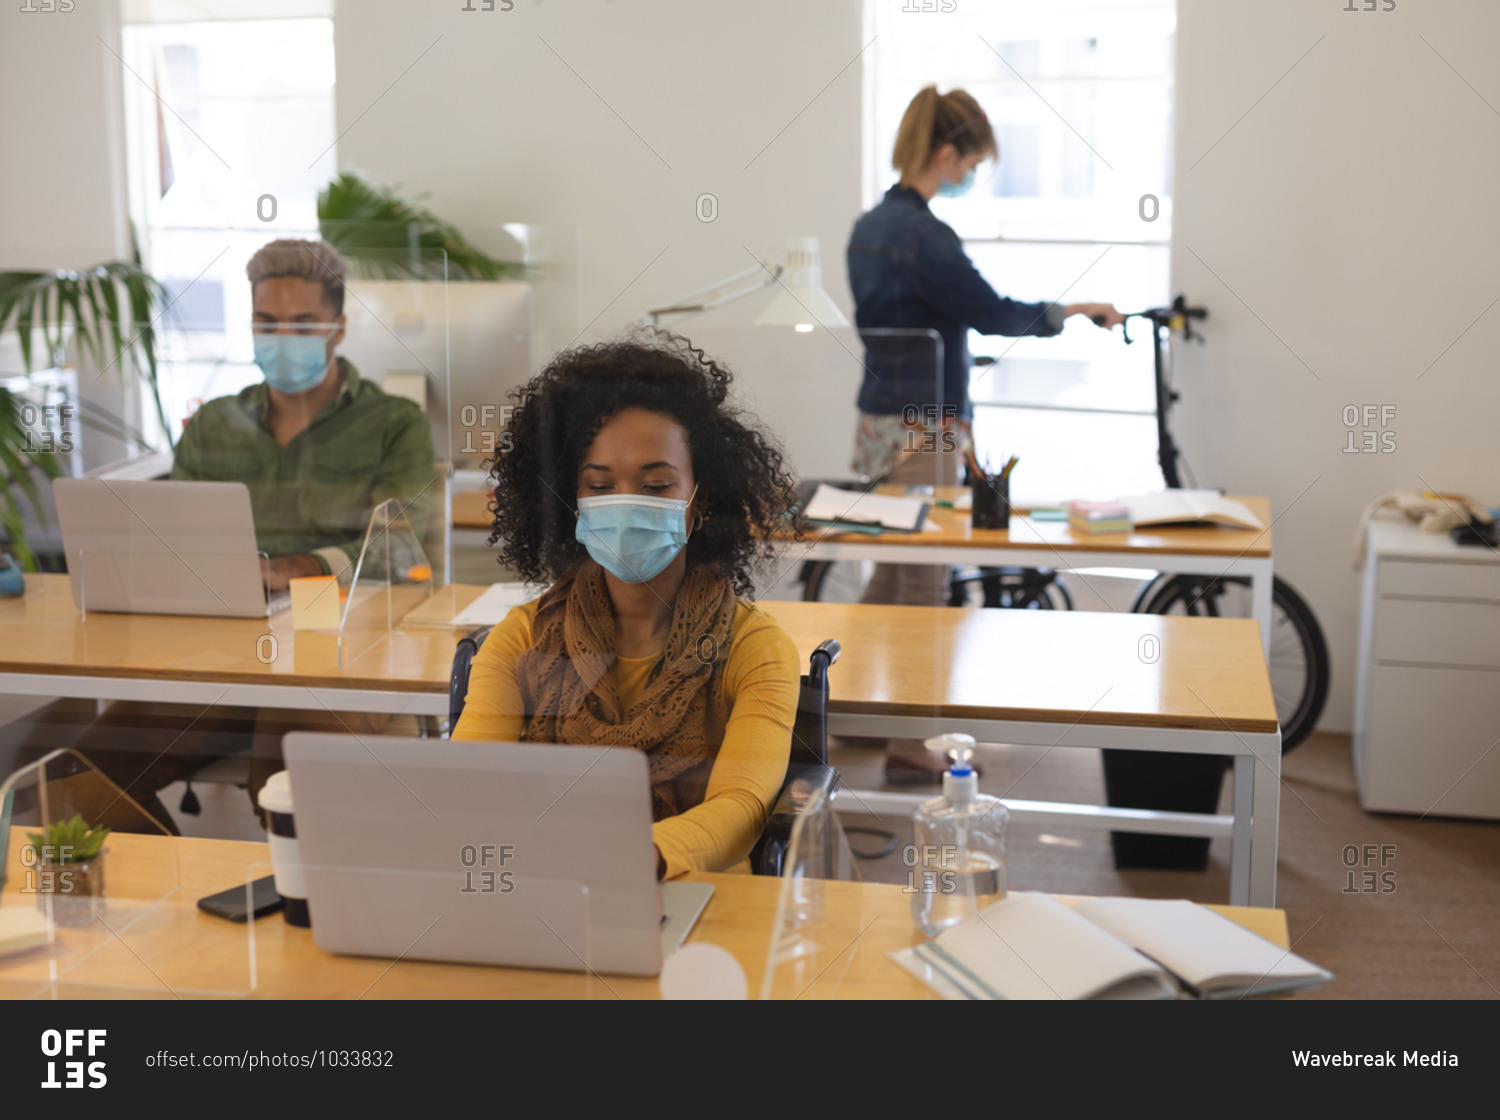 Multi ethnic group of male and female creatives working at office desks with protective screens, using laptop computers. Health and hygiene in workplace during Coronavirus Covid 19 pandemic.